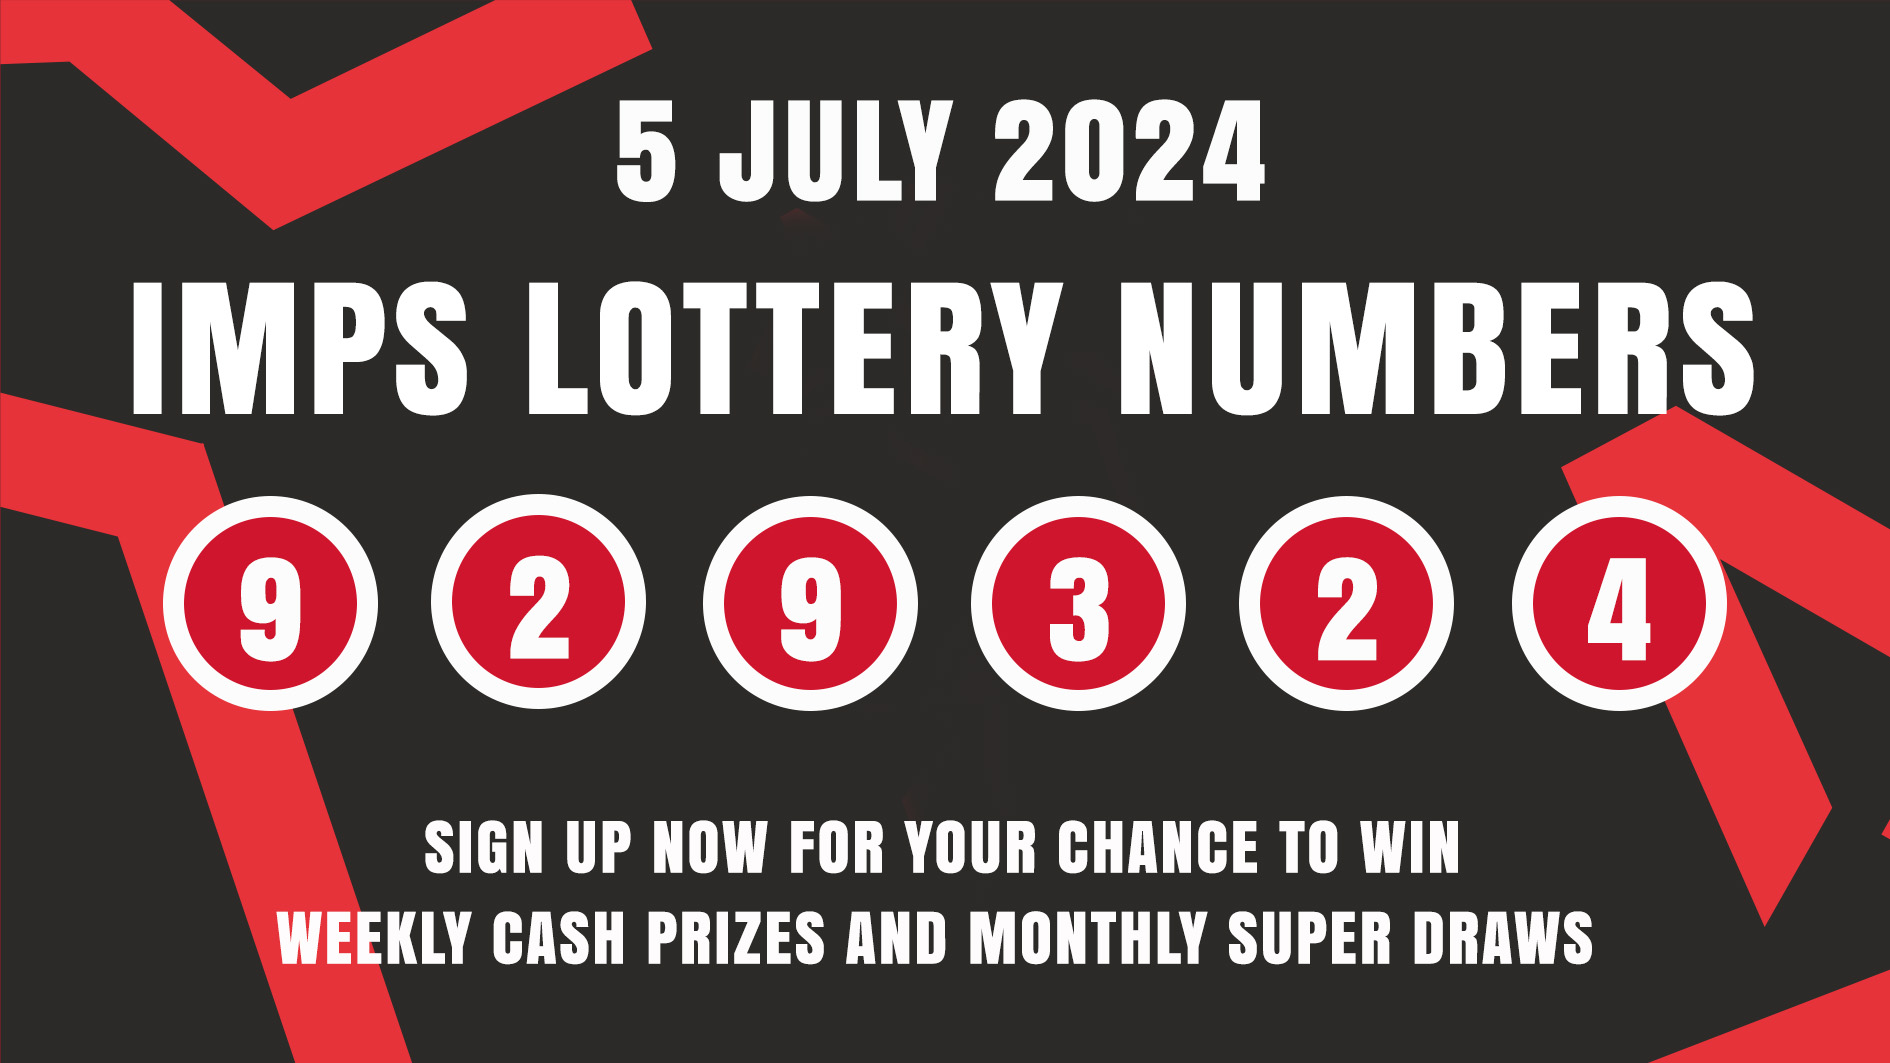 The Imps Lottery number for 5 July 2024: 929324